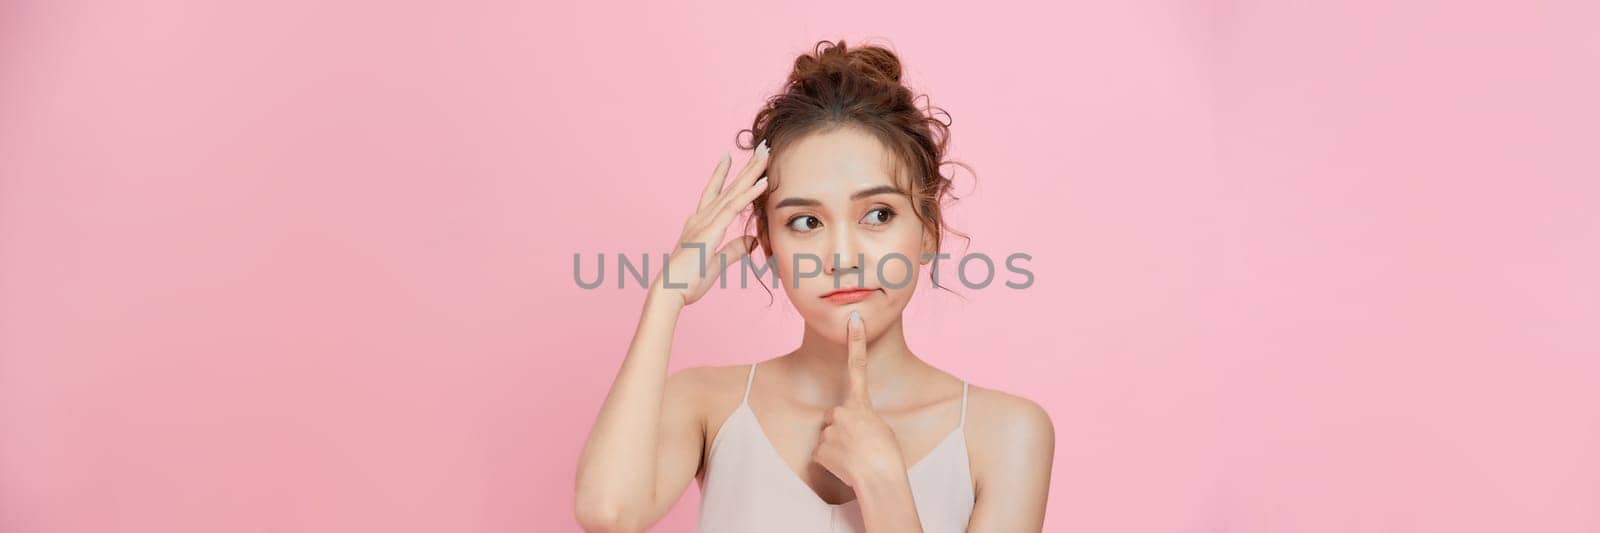 Portrait of a young woman thinking with finger on chin, isolated on pink background by makidotvn